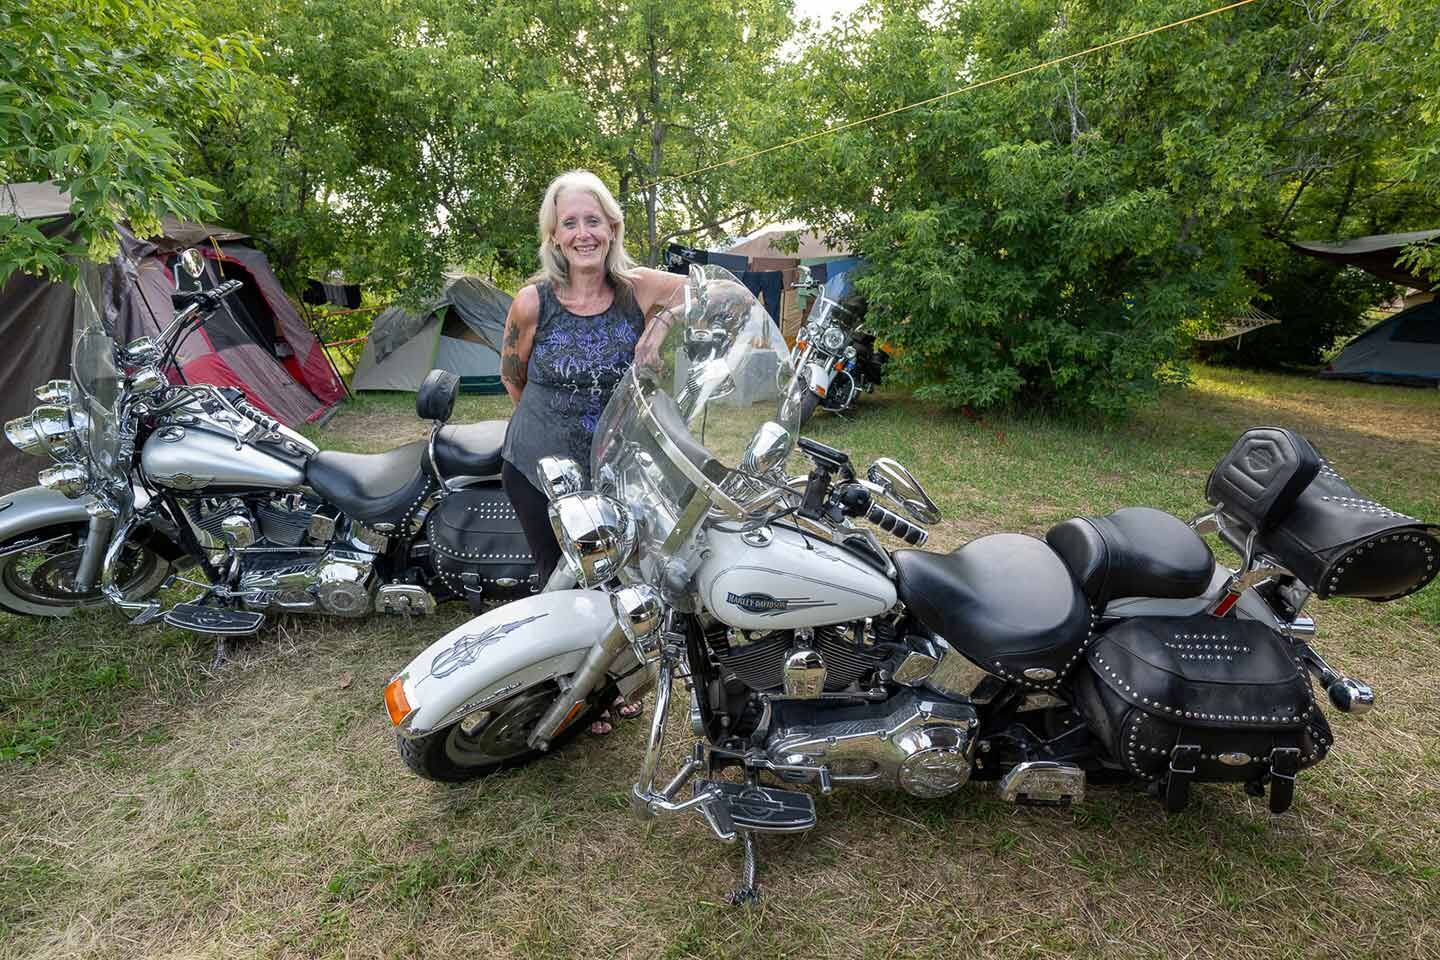 Still life with rider and steed. Camping at the Sturgis Buffalo Chip campground during the Sturgis Motorcycle Rally.